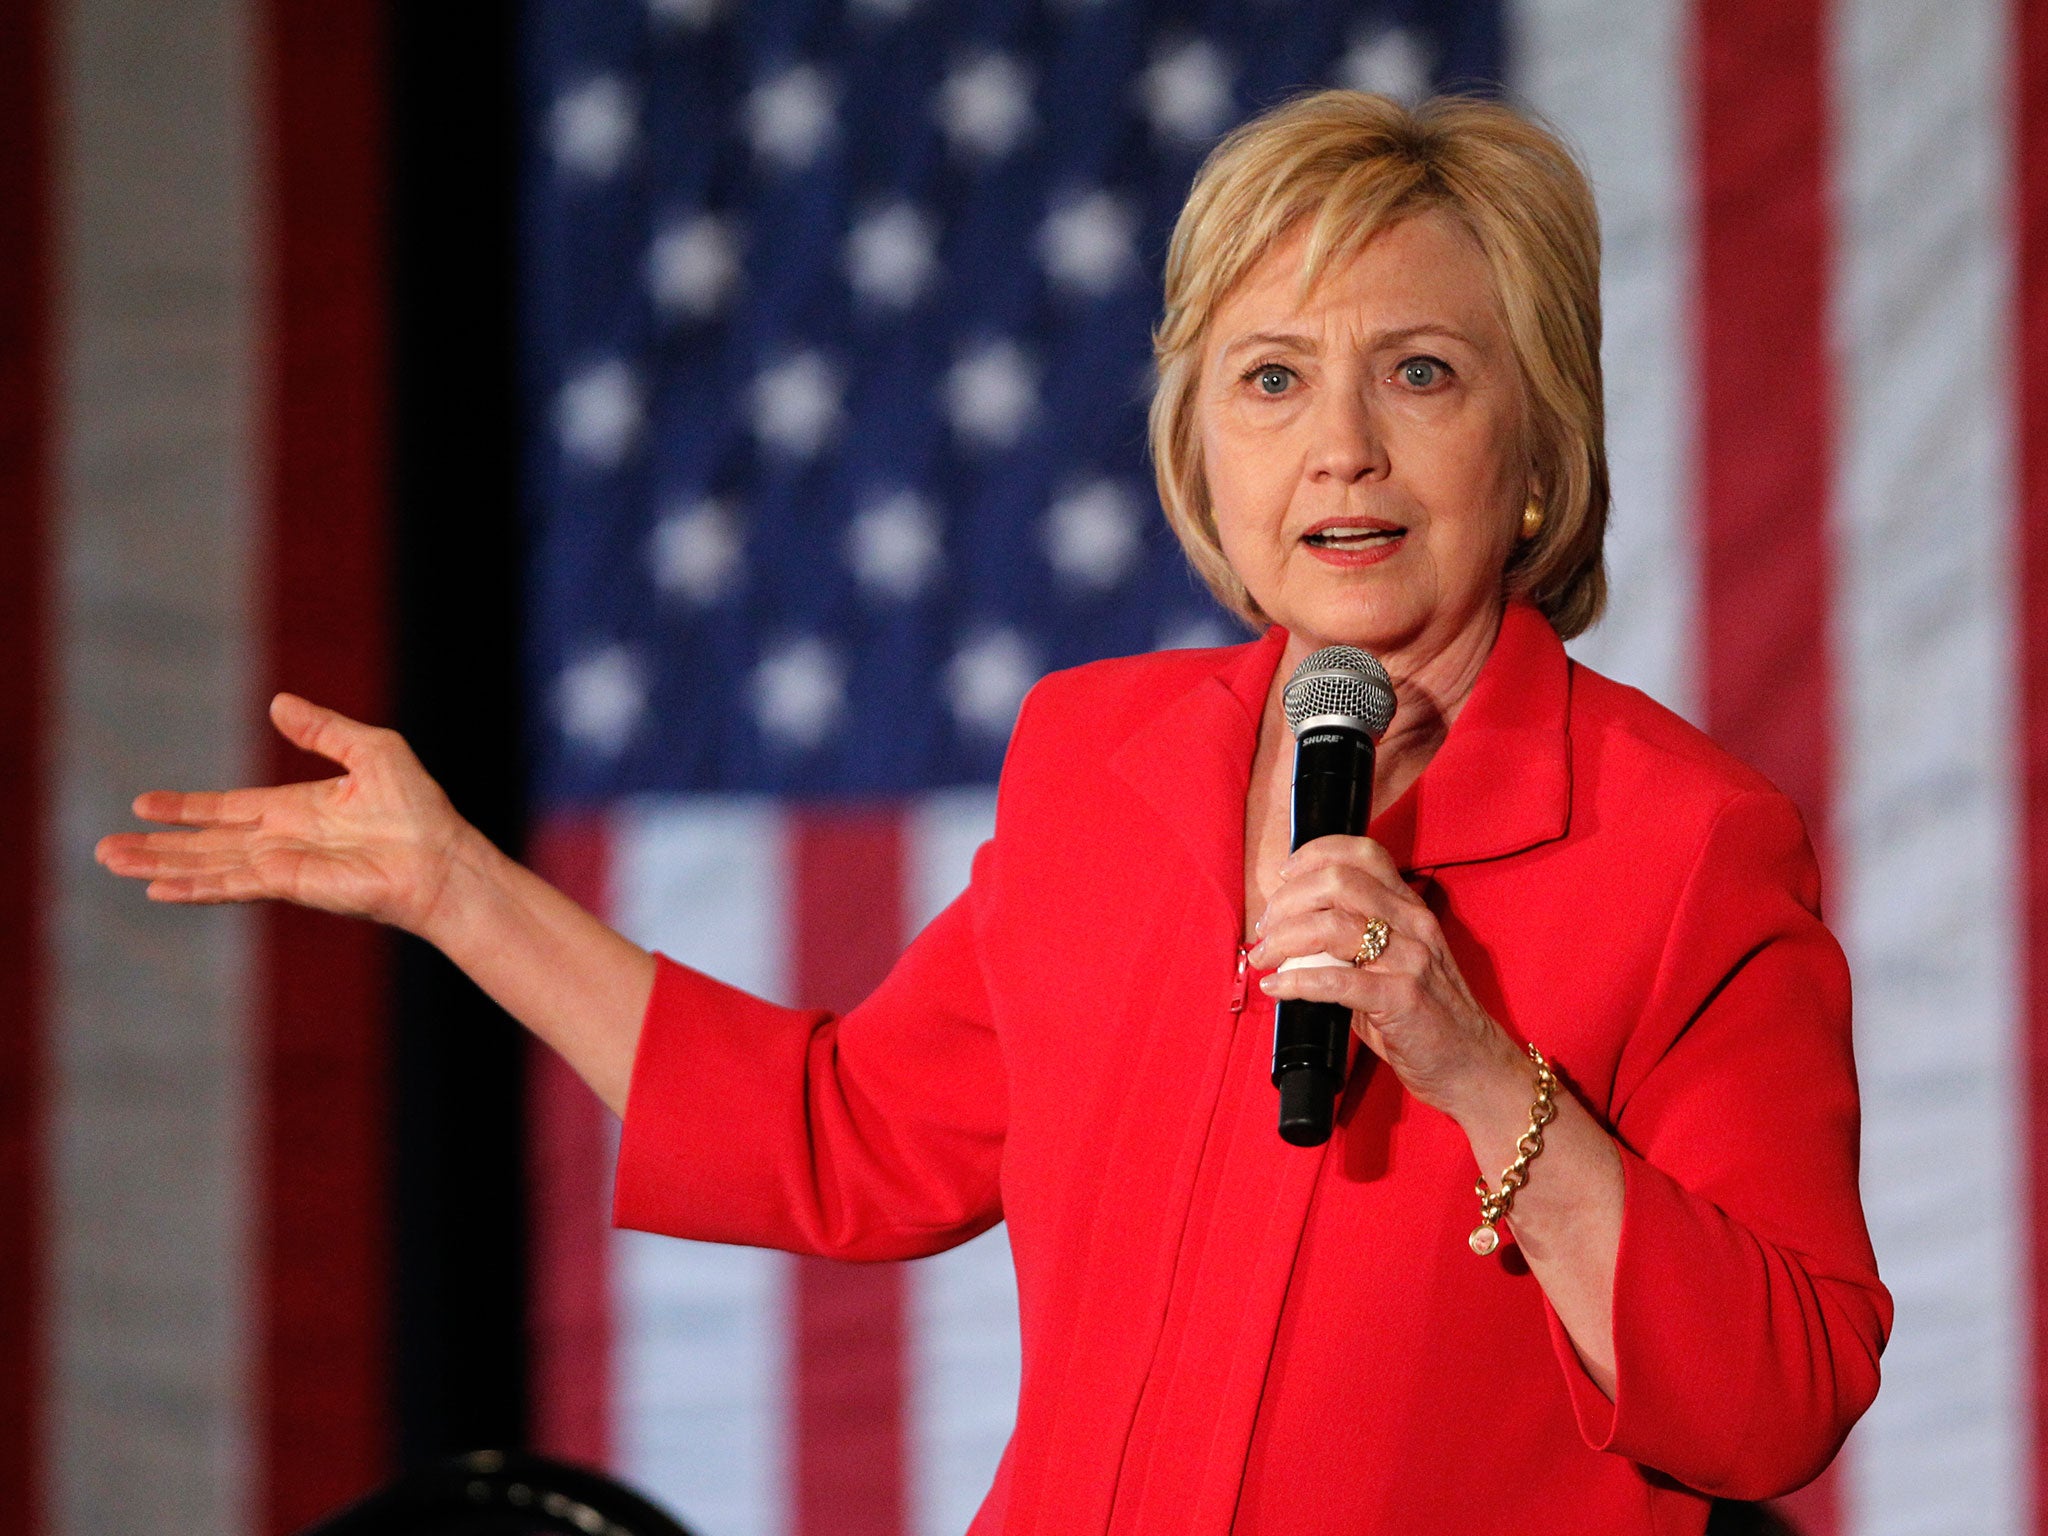 Ms Clinton has herself been accused of blaming homebuyers for the housing crisis